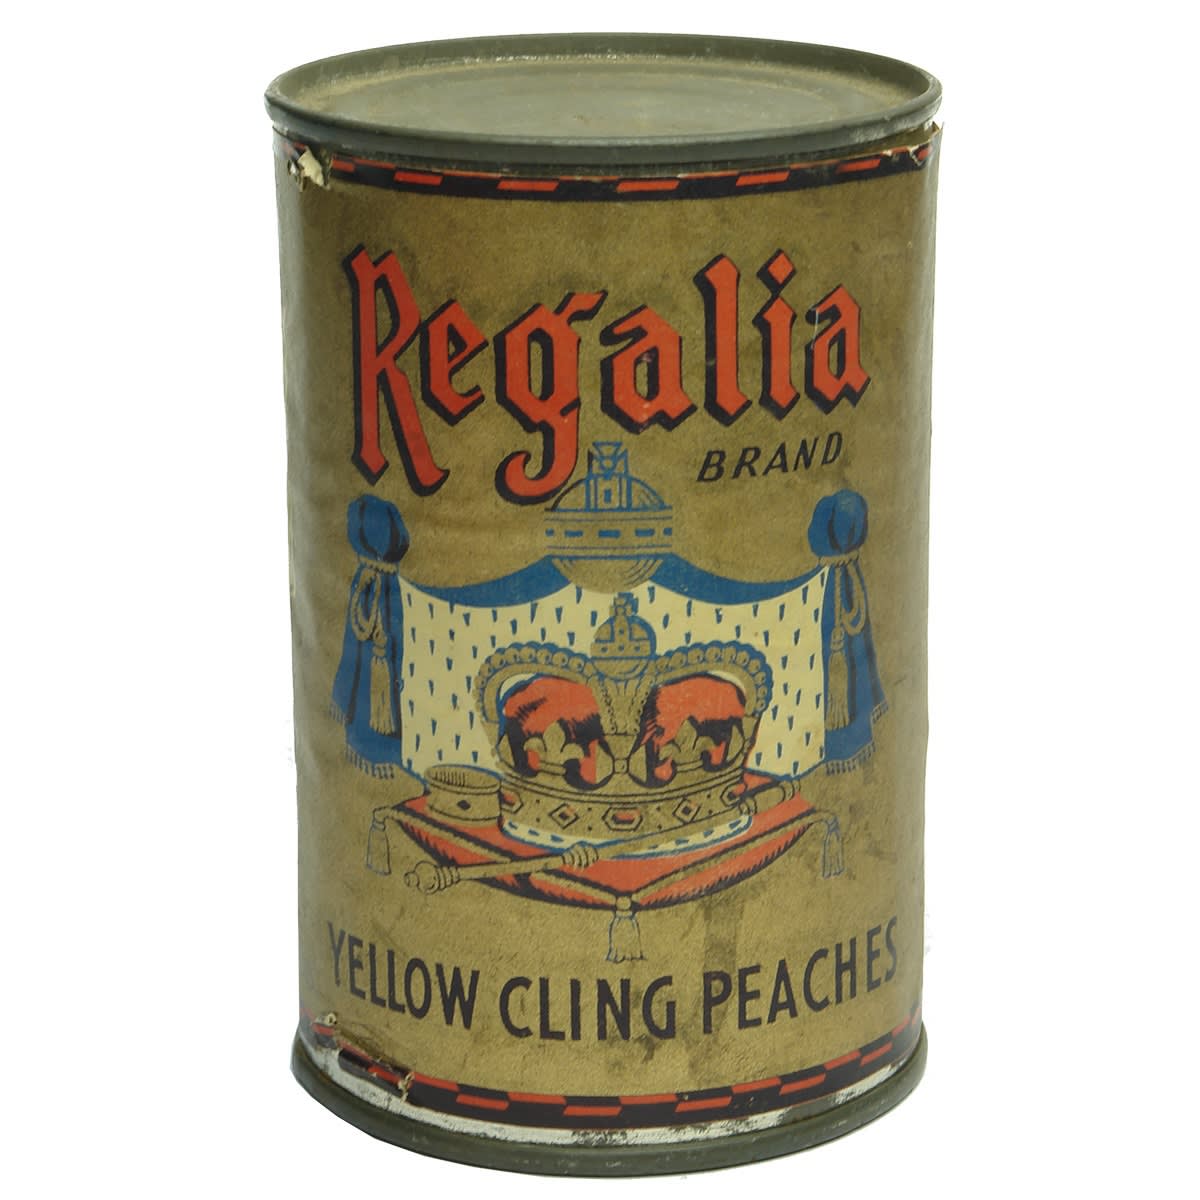 Tin with Paper Label. Regalia Brand Yellow Cling Peaches. Shepparton Fruit Preserving Co. (Victoria)